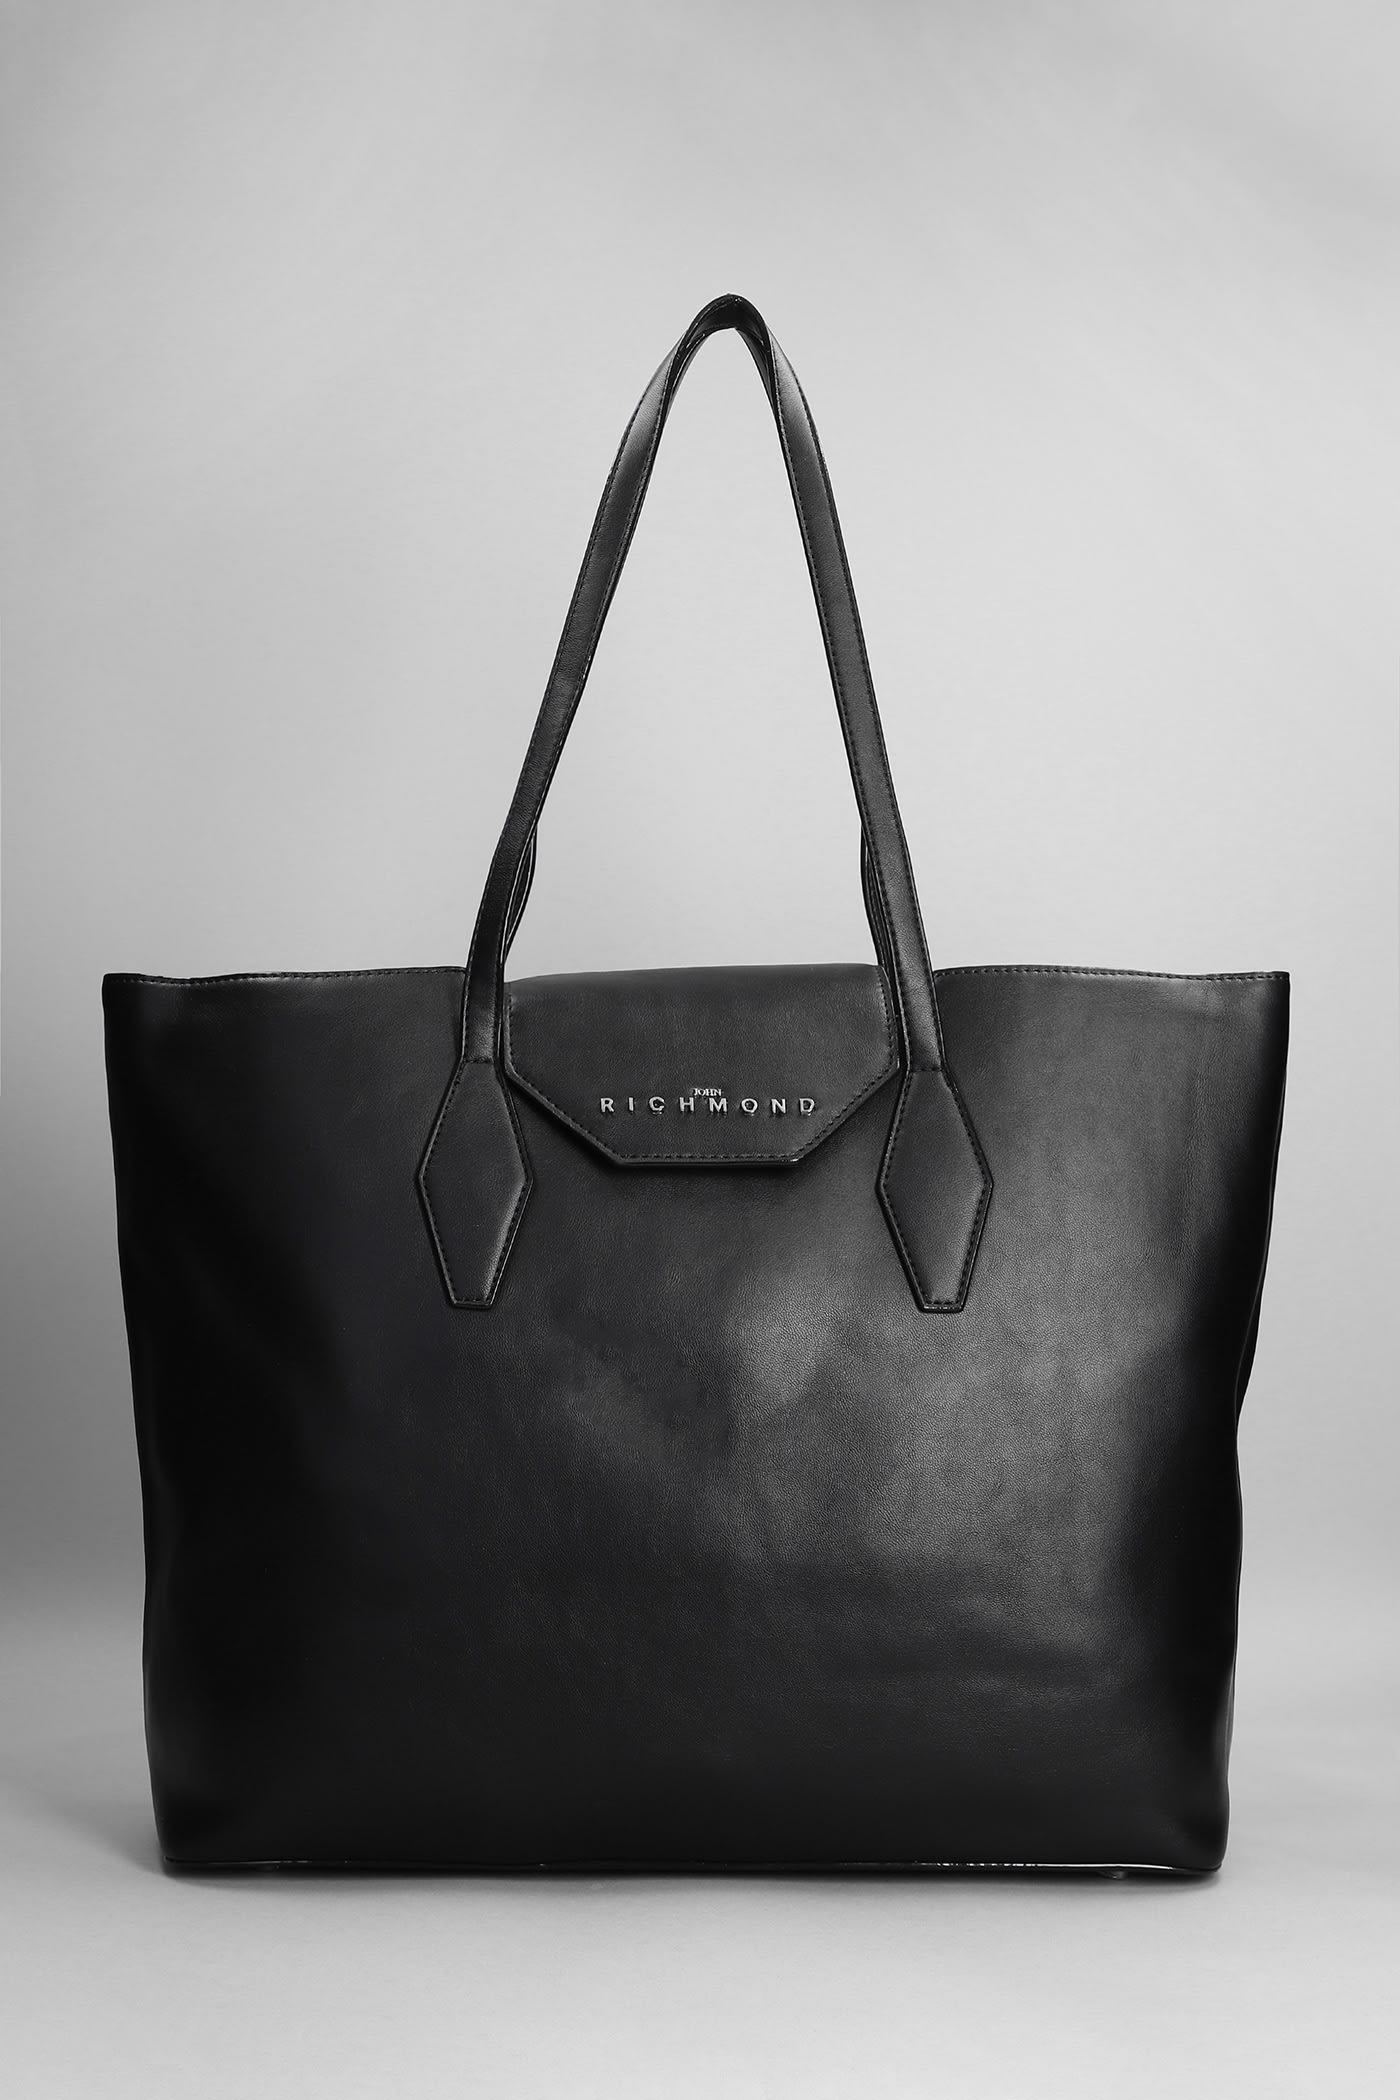 John Richmond Marty Tote In Black Leather